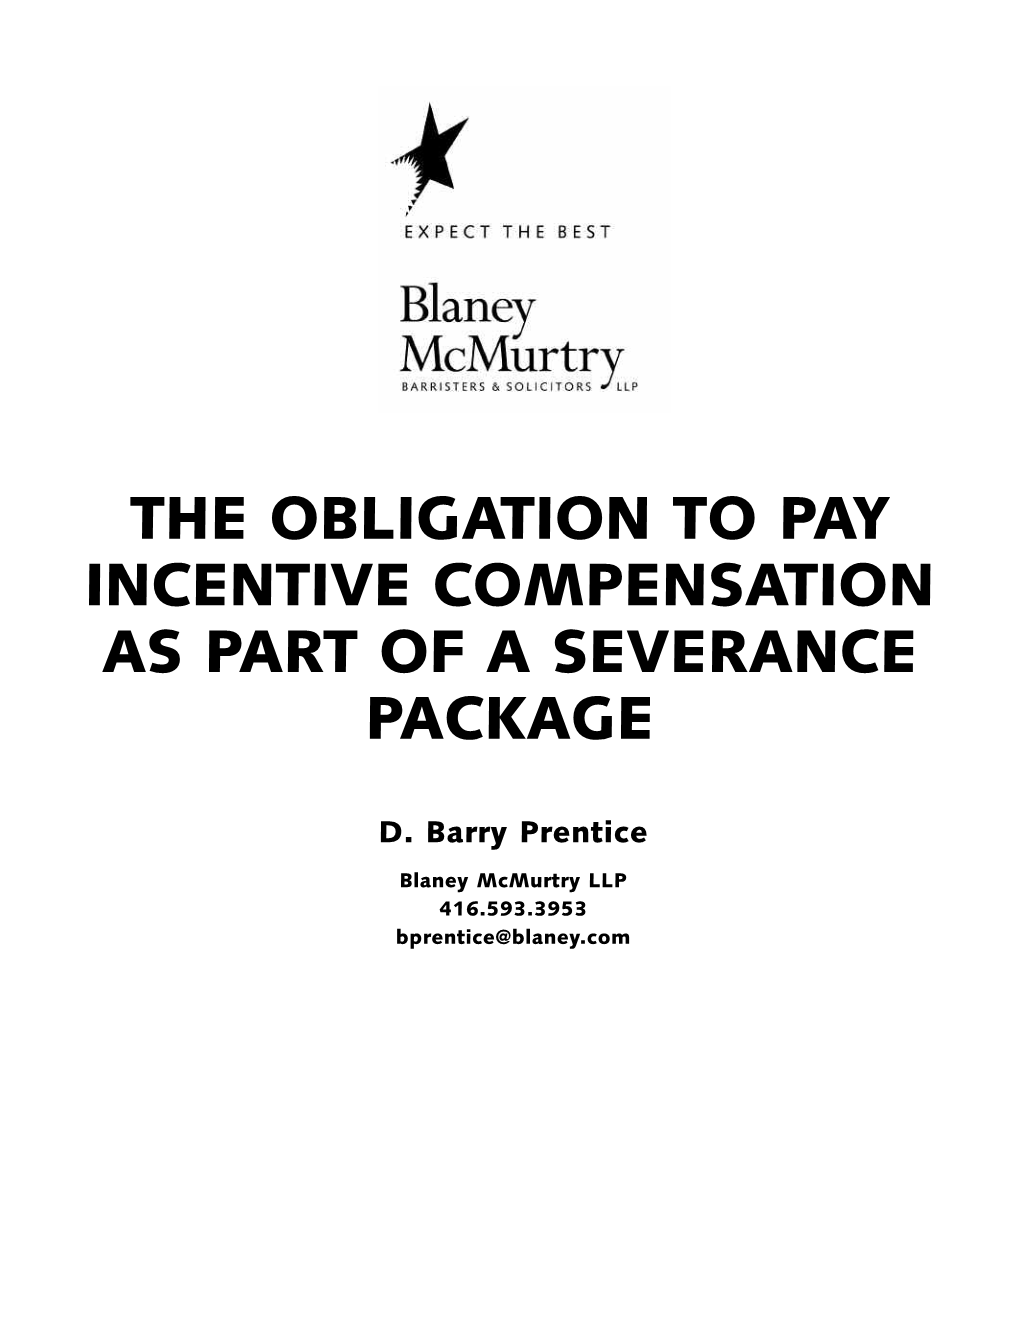 The Obligation to Pay Incentive Compensation As Part of a Severance Package